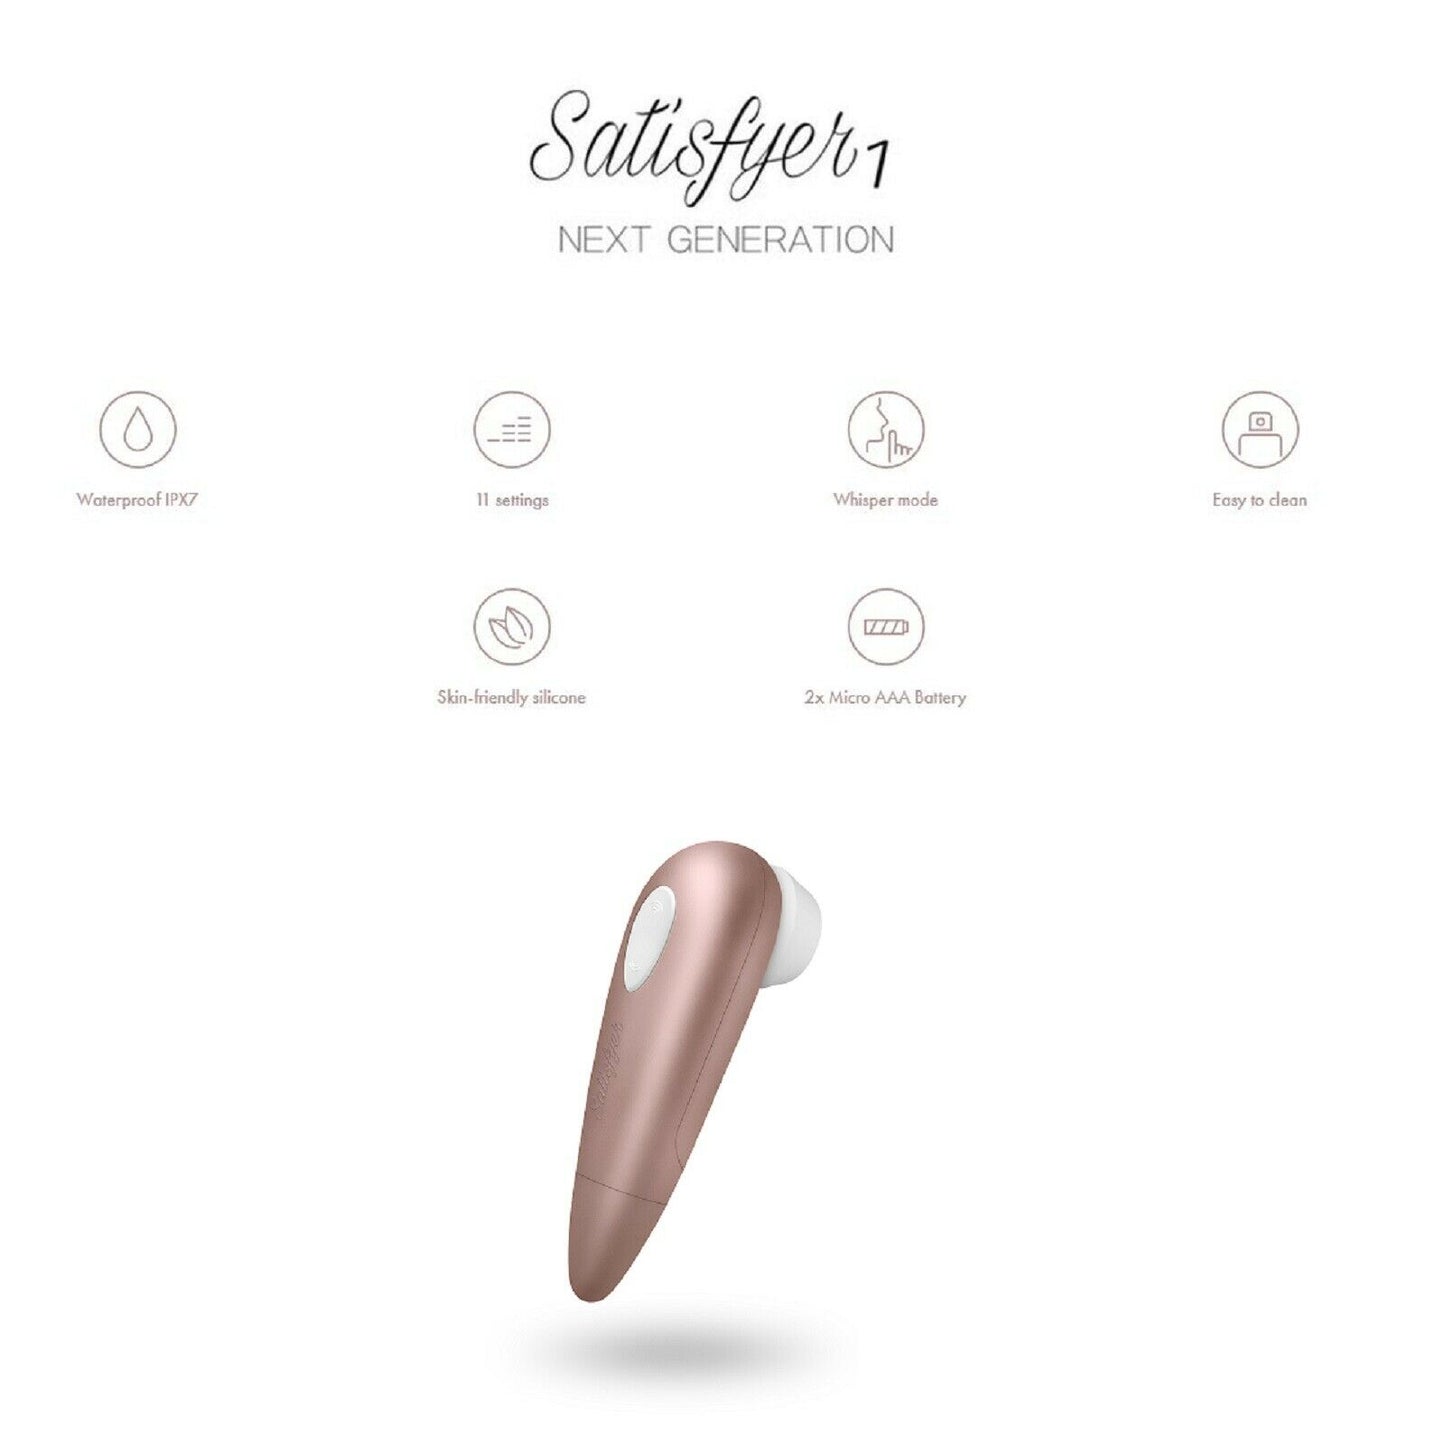 Satisfyer 1 Air Waves Clitoral Stimulator Air Suction Vibrator Clit Sex Toy NEW